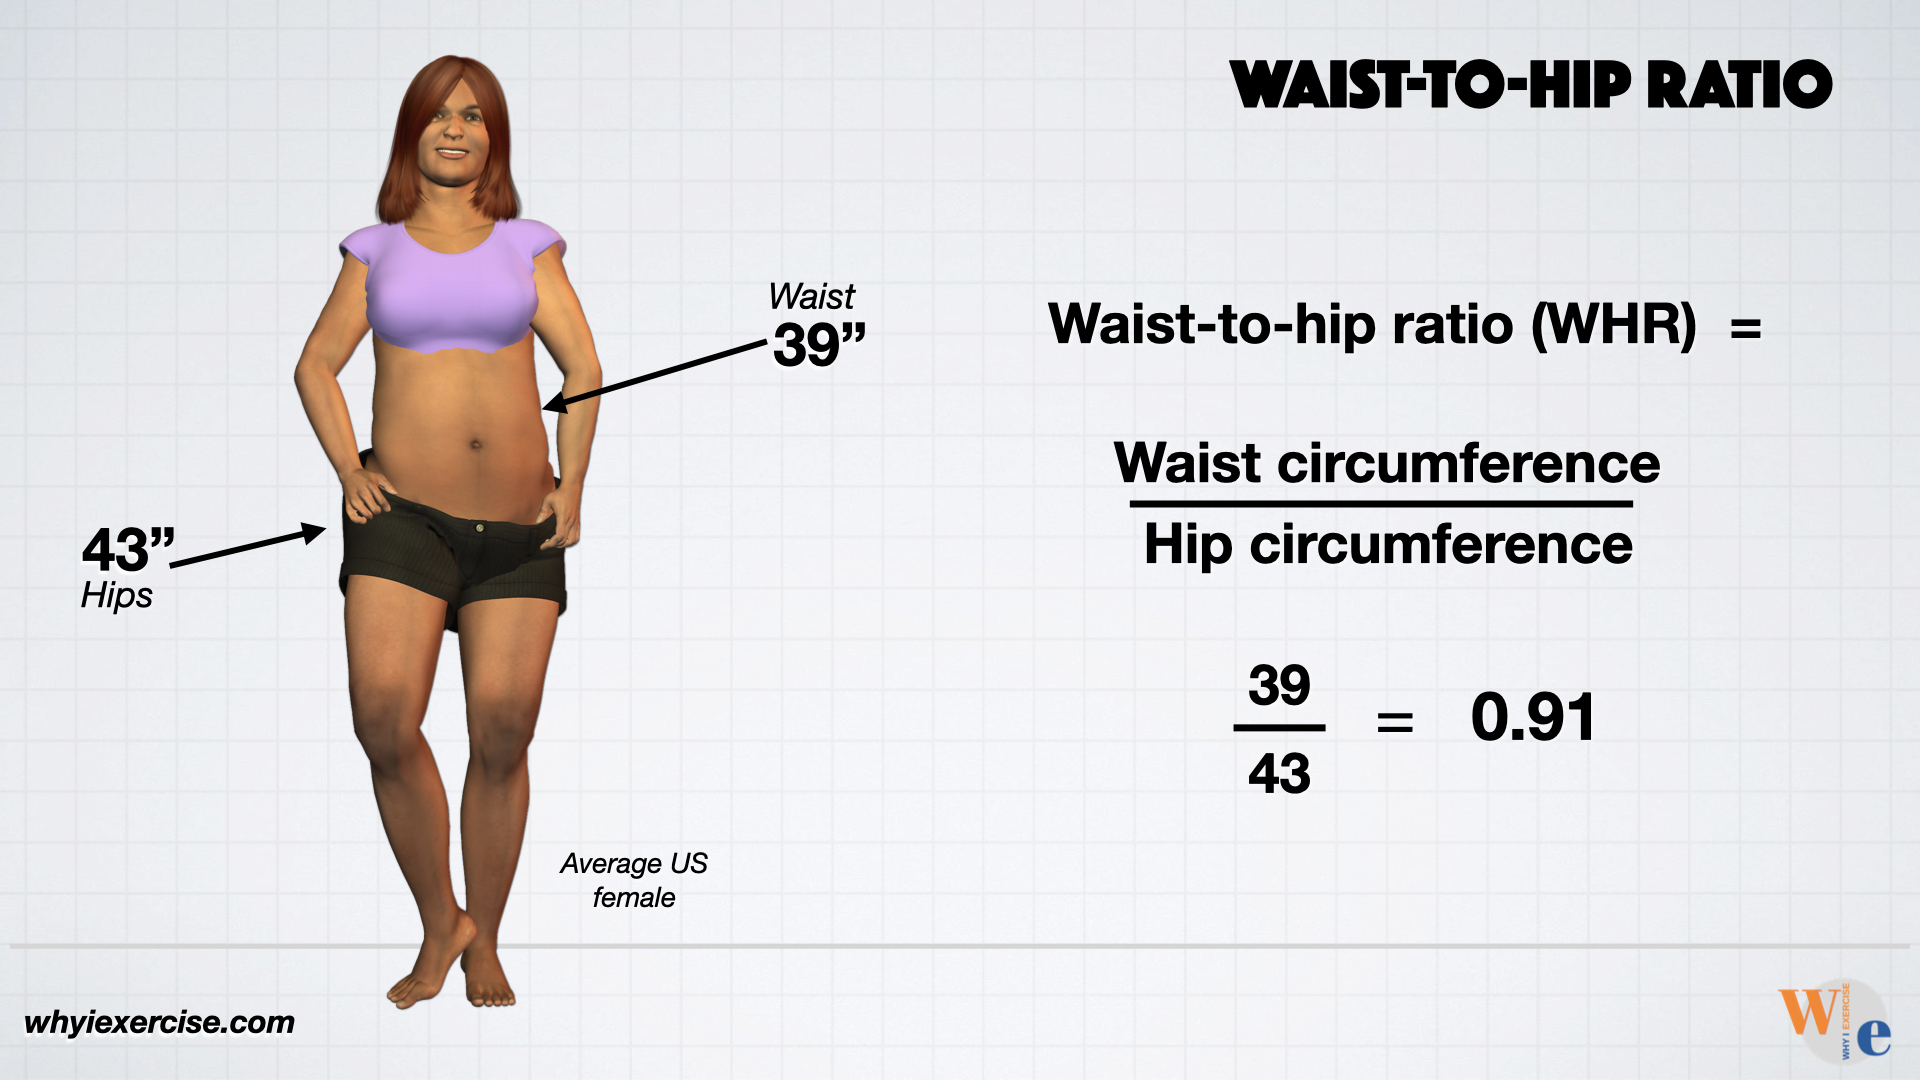 https://www.whyiexercise.com/images/calculate.waist.hip.ratio.jpg